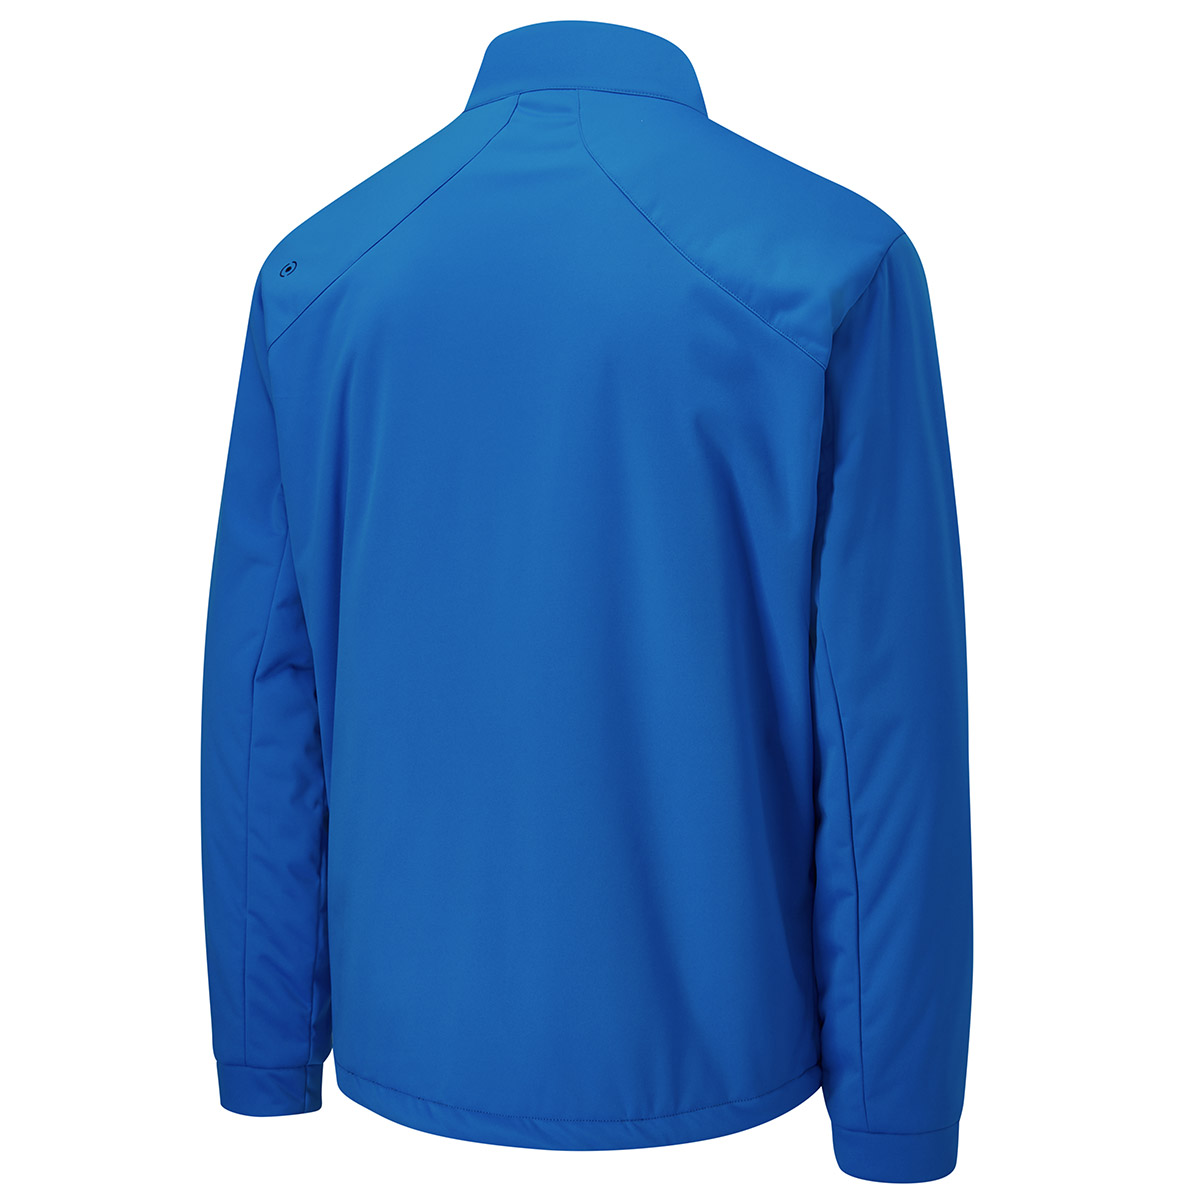 PING Norse Primaloft II Jacket from american golf